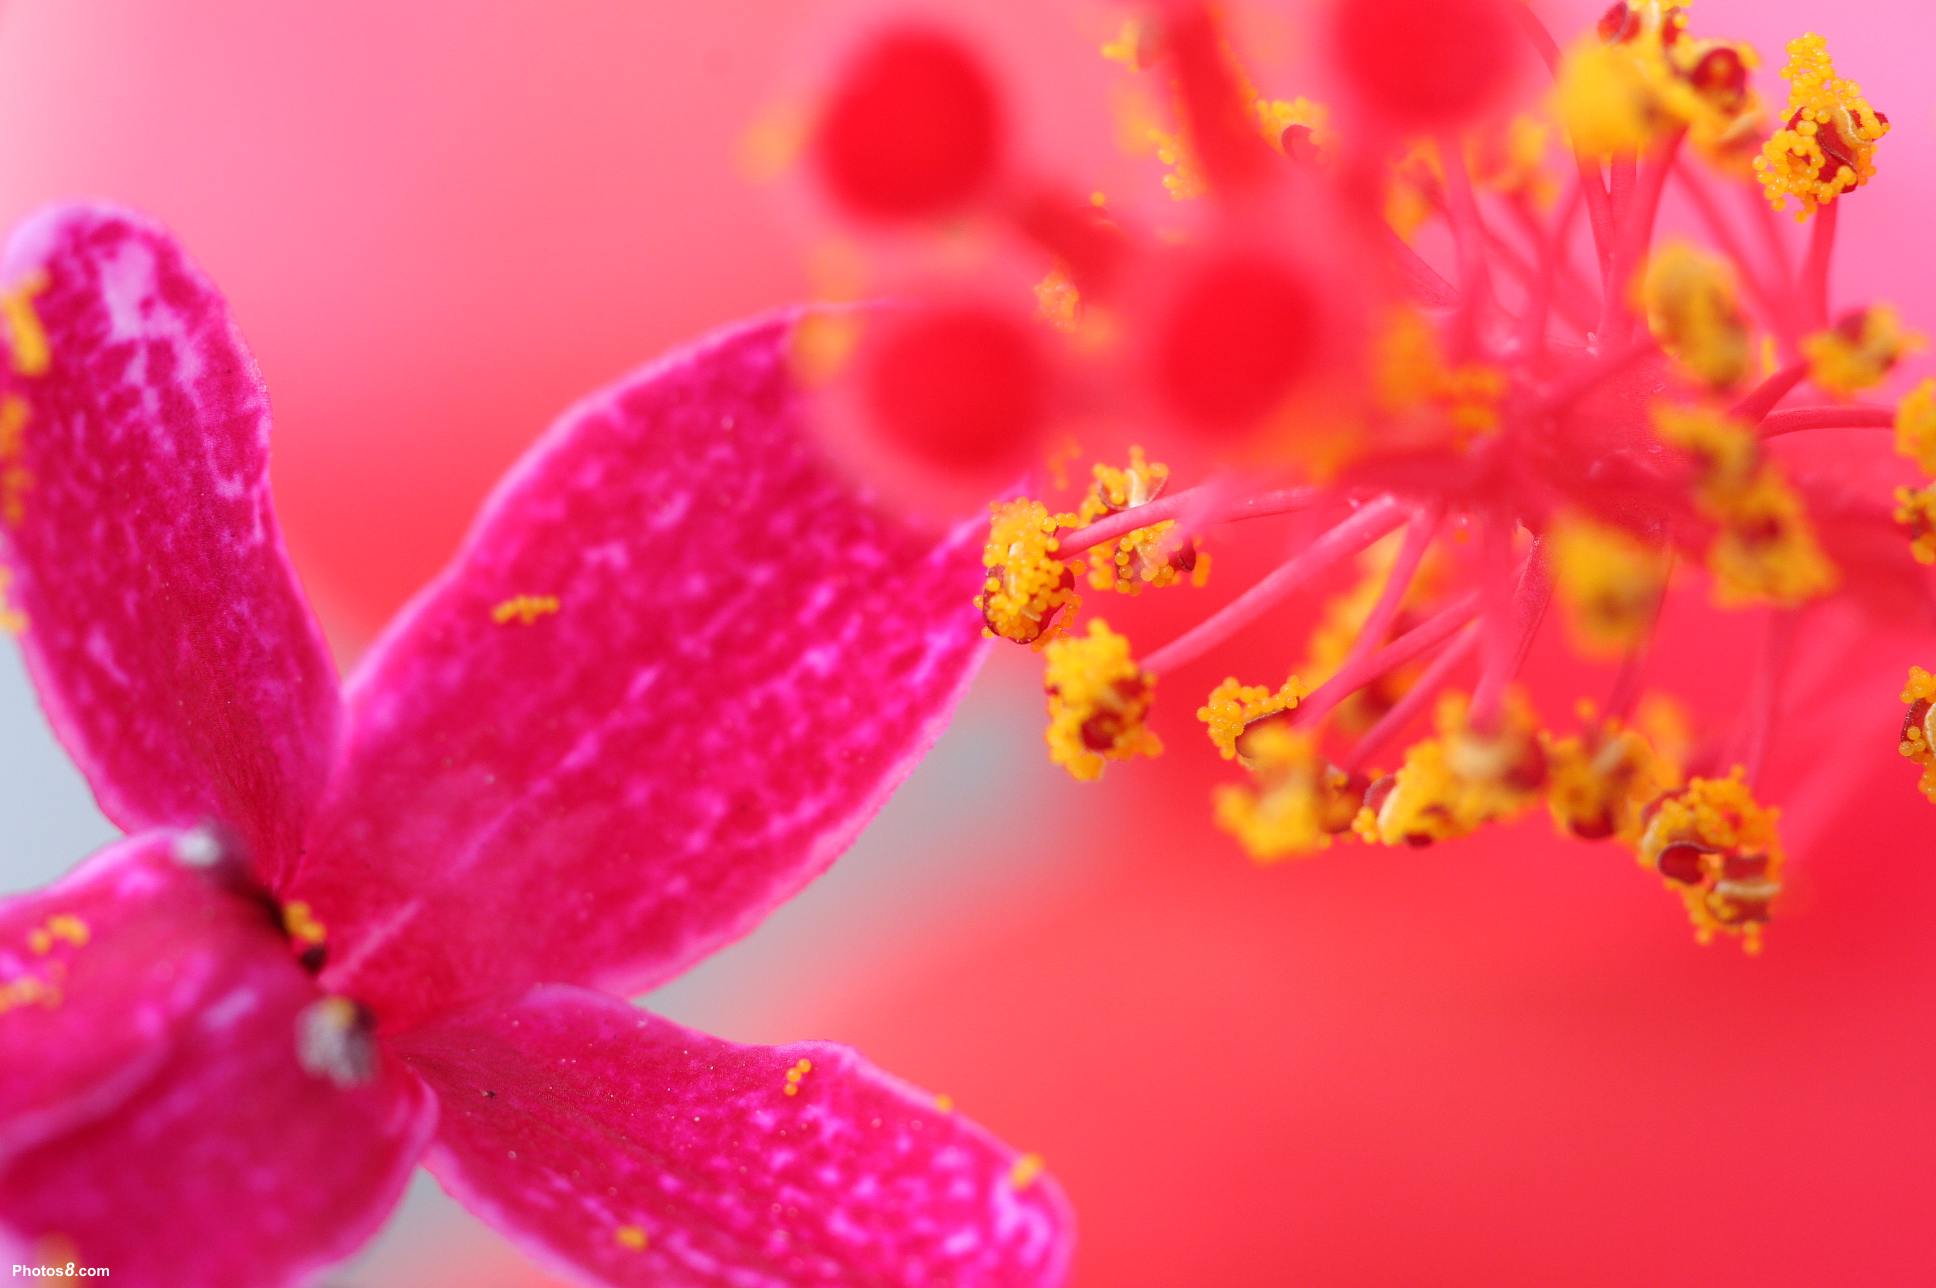 Flowers For Background Wallpaper 21375 High Resolution. download